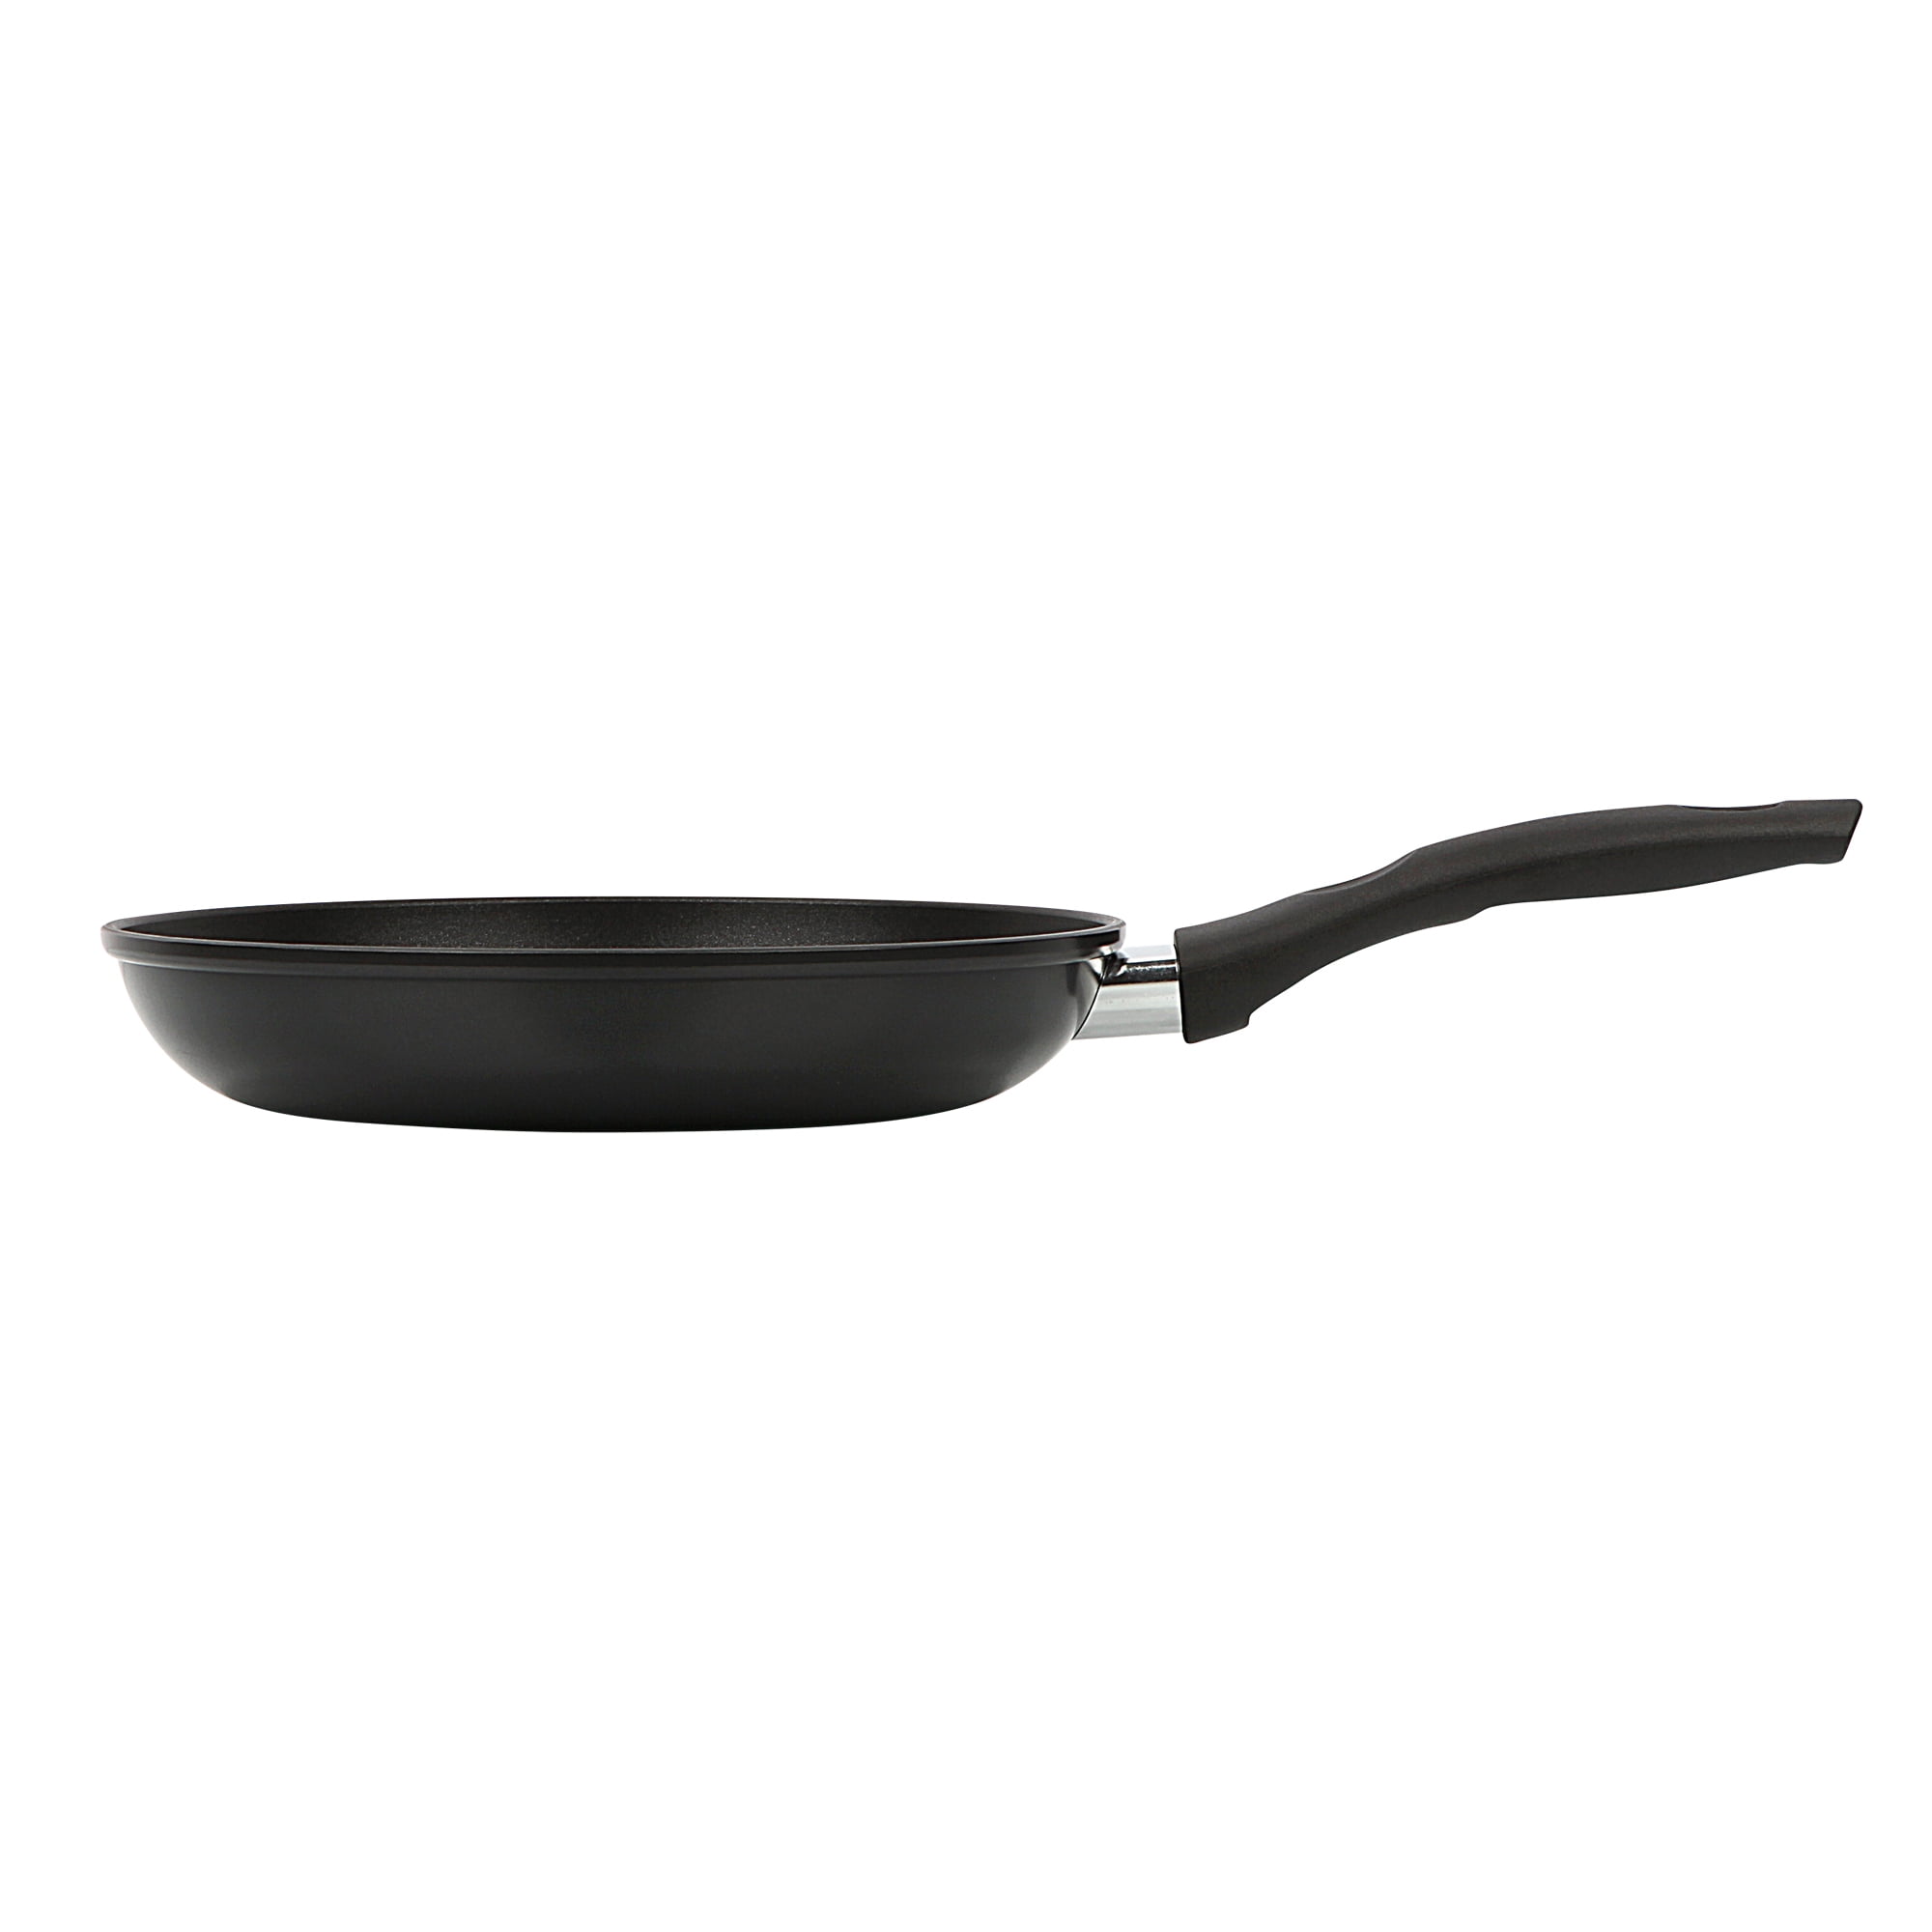 Mopita Classico 5 Layer NonStick Forged Aluminum Fry Pan, 24cm / 9.5-in